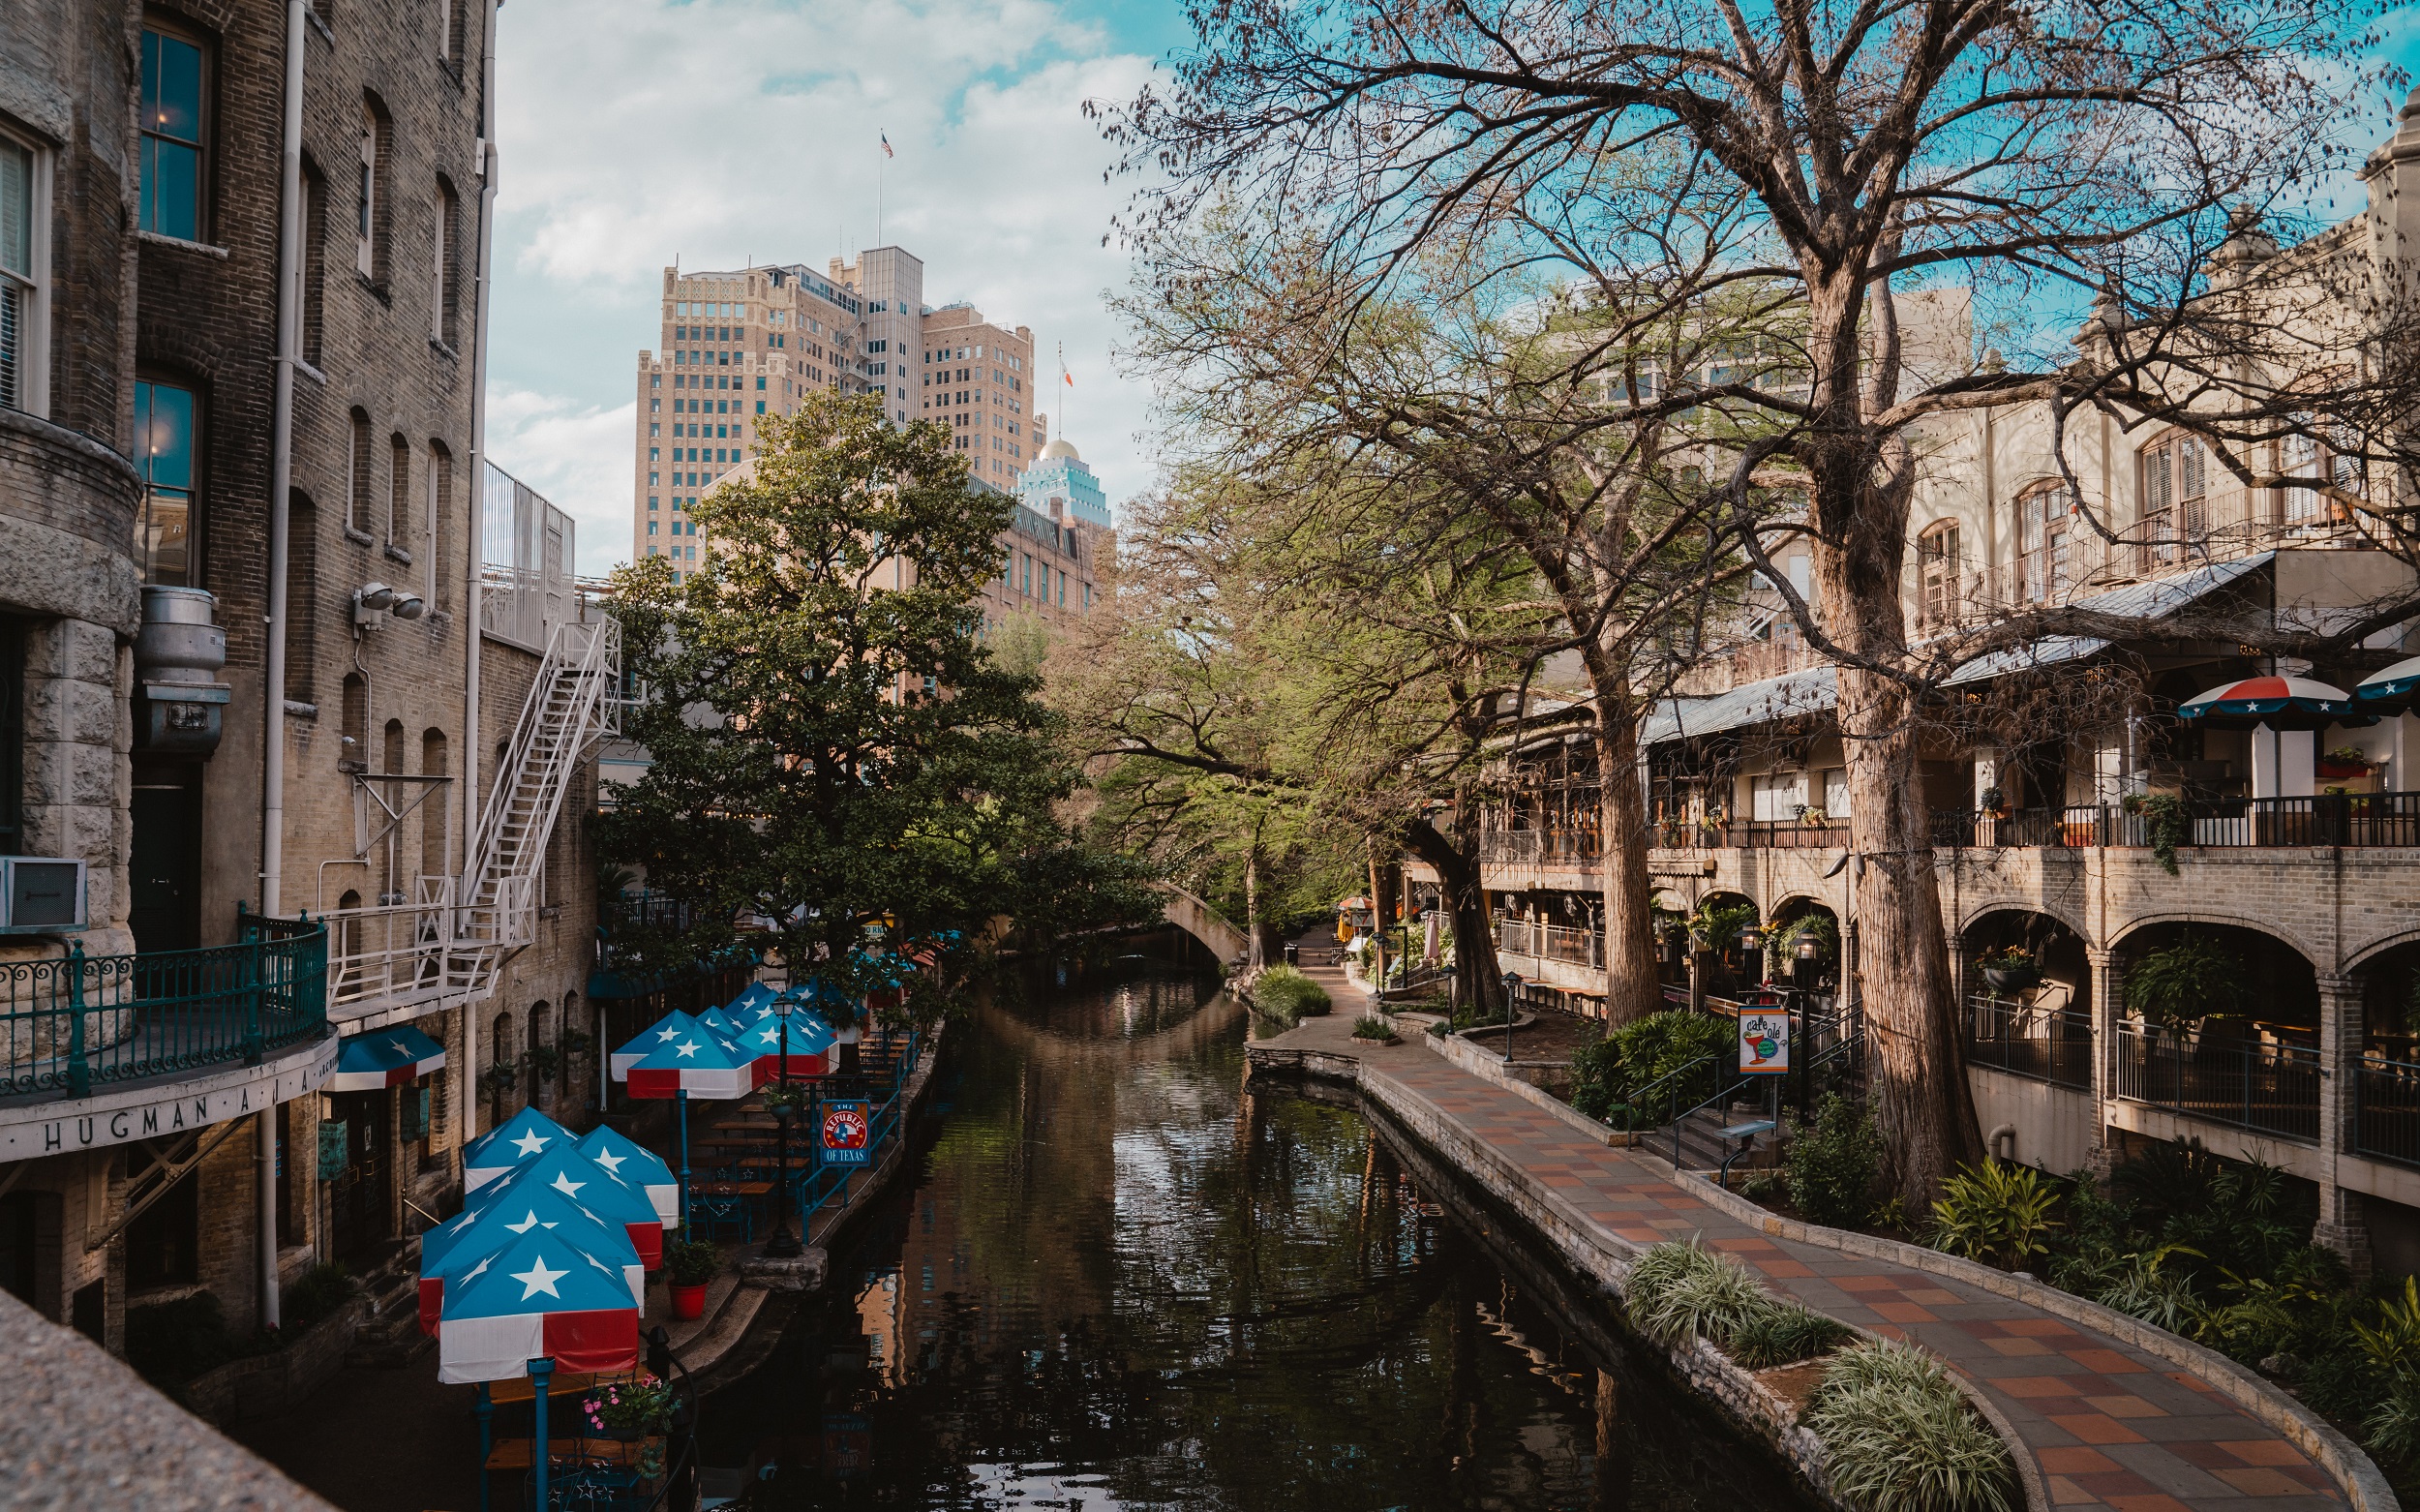 Unforgettable Texas: The Top 12 Must-See Attractions in San Antonio, Texas